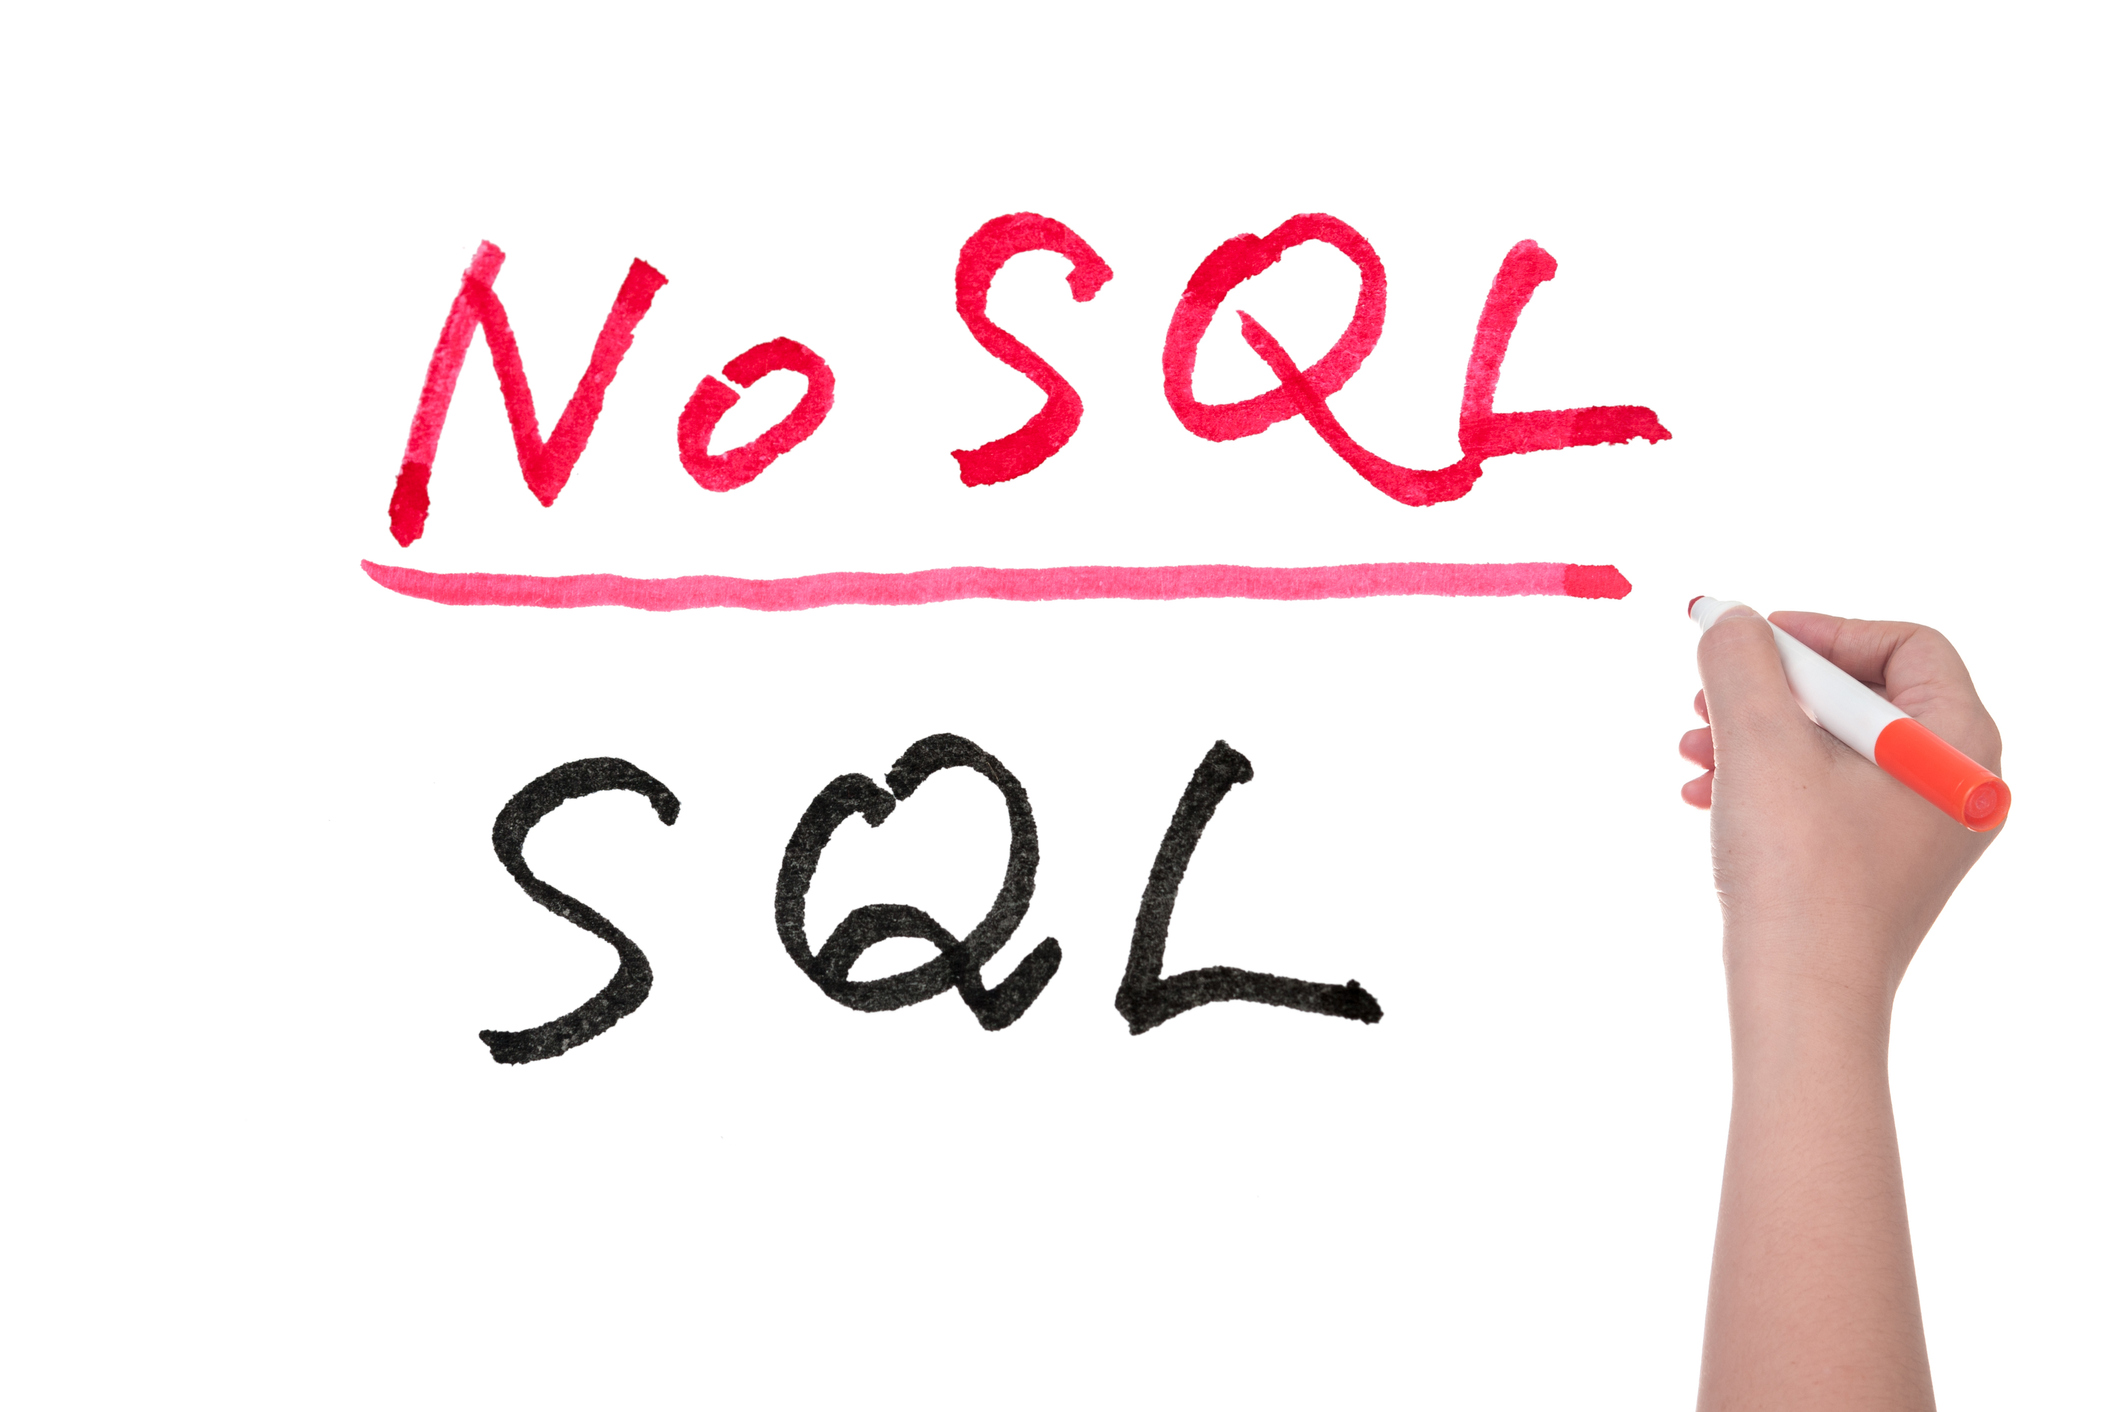 SQL or NoSQL words written on white board, Big data concept